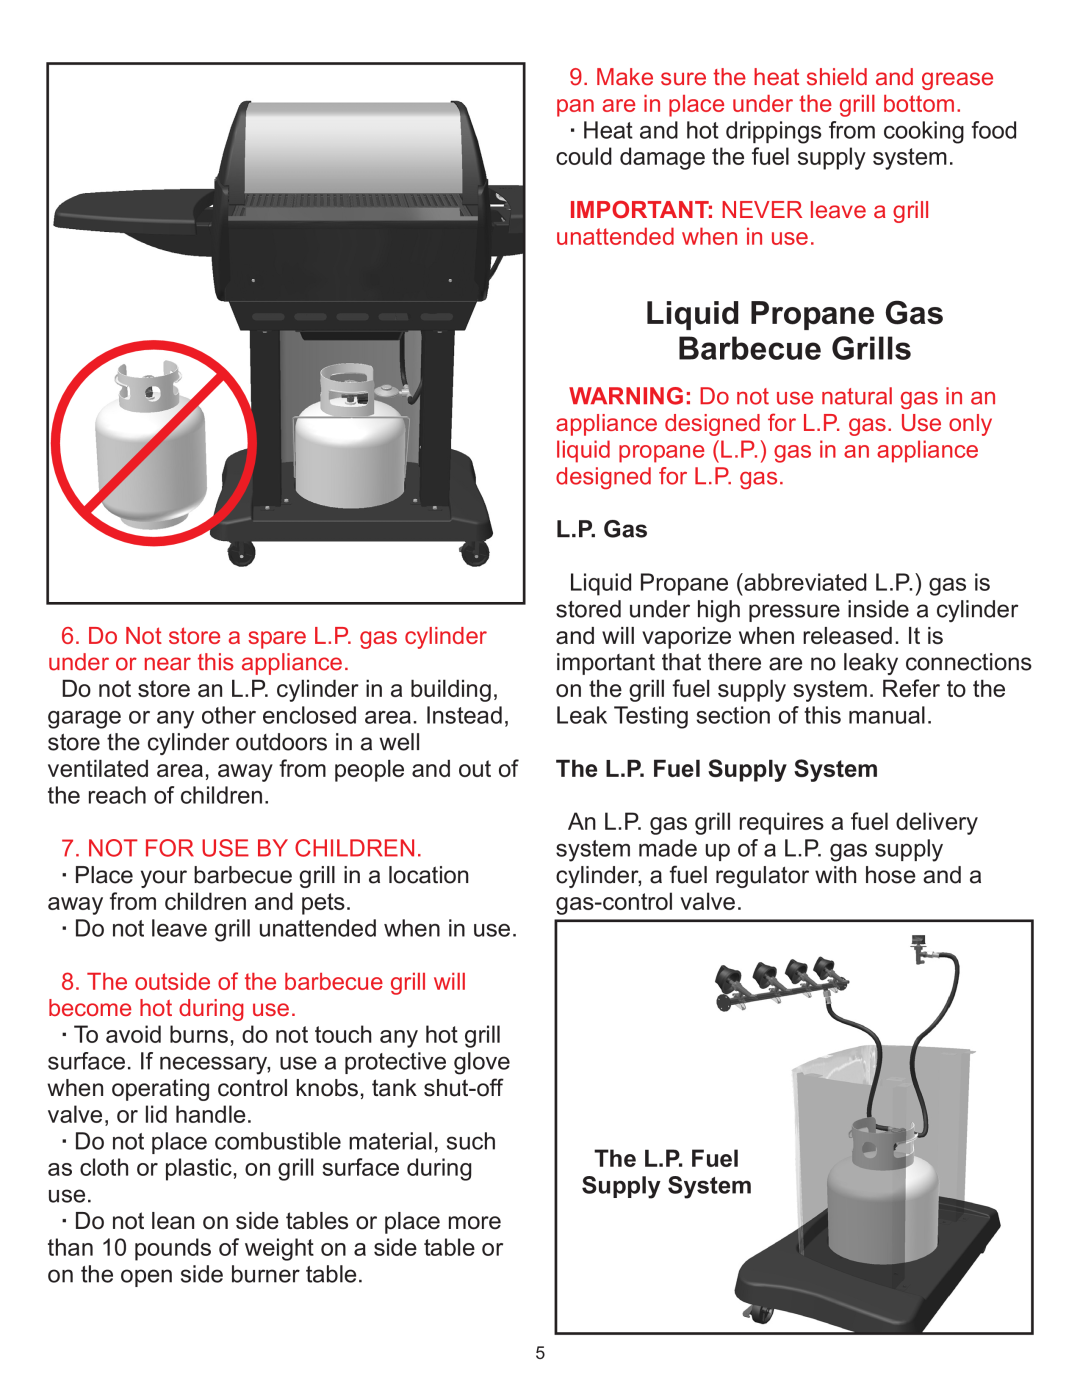 Vermont Casting Gas Grill owner manual Liquid Propane Gas Barbecue Grills, L.P. Gas, The L.P. Fuel Supply System 